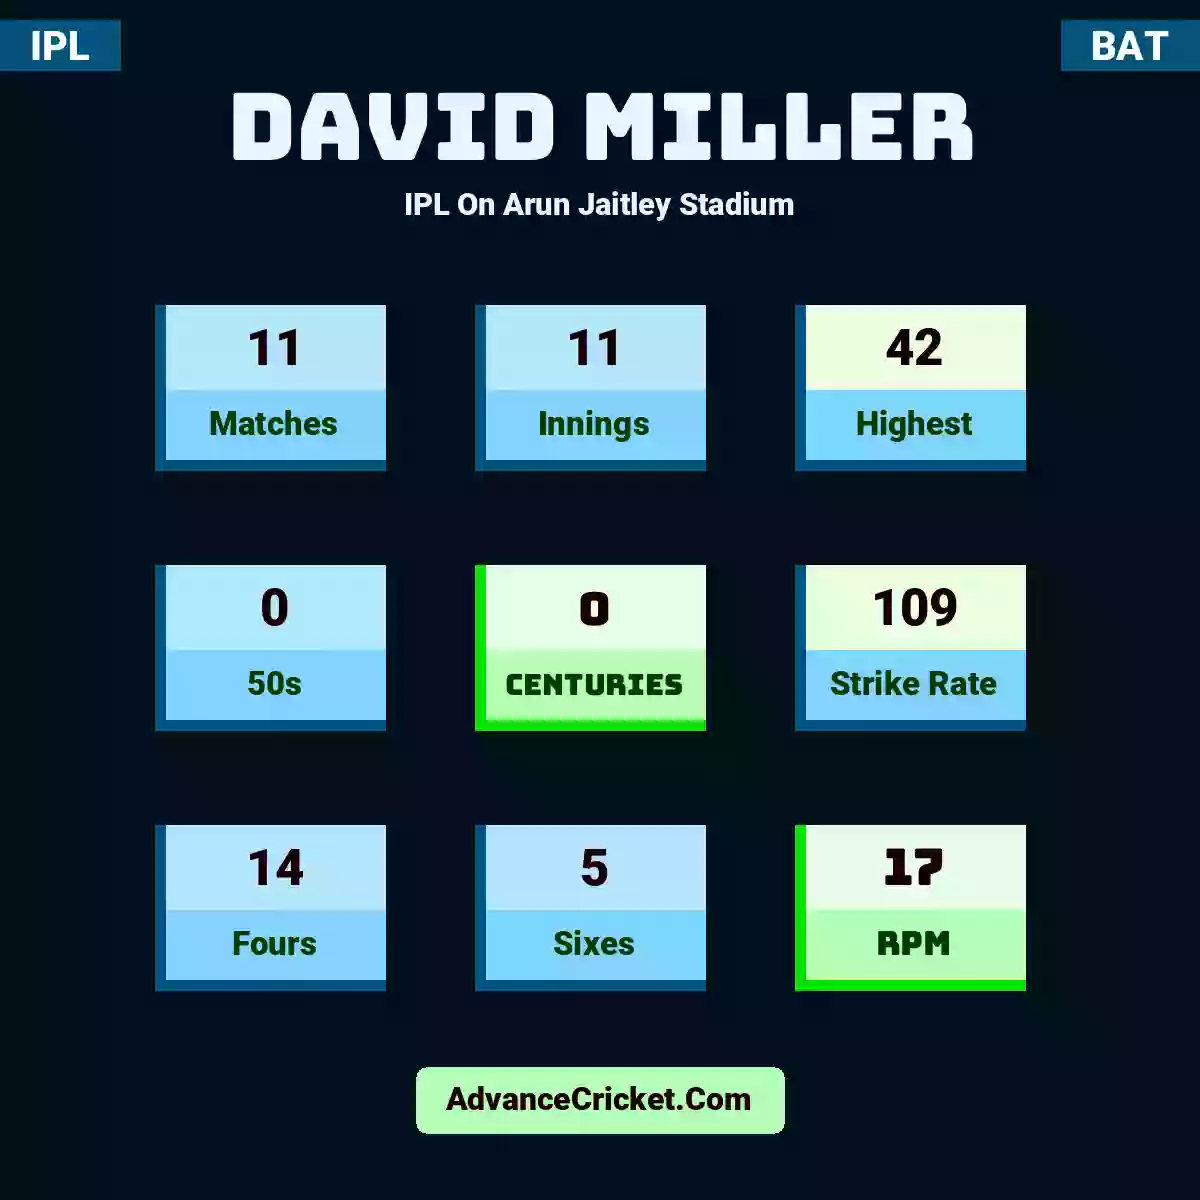 David Miller IPL  On Arun Jaitley Stadium, David Miller played 11 matches, scored 42 runs as highest, 0 half-centuries, and 0 centuries, with a strike rate of 109. D.Miller hit 14 fours and 5 sixes, with an RPM of 17.